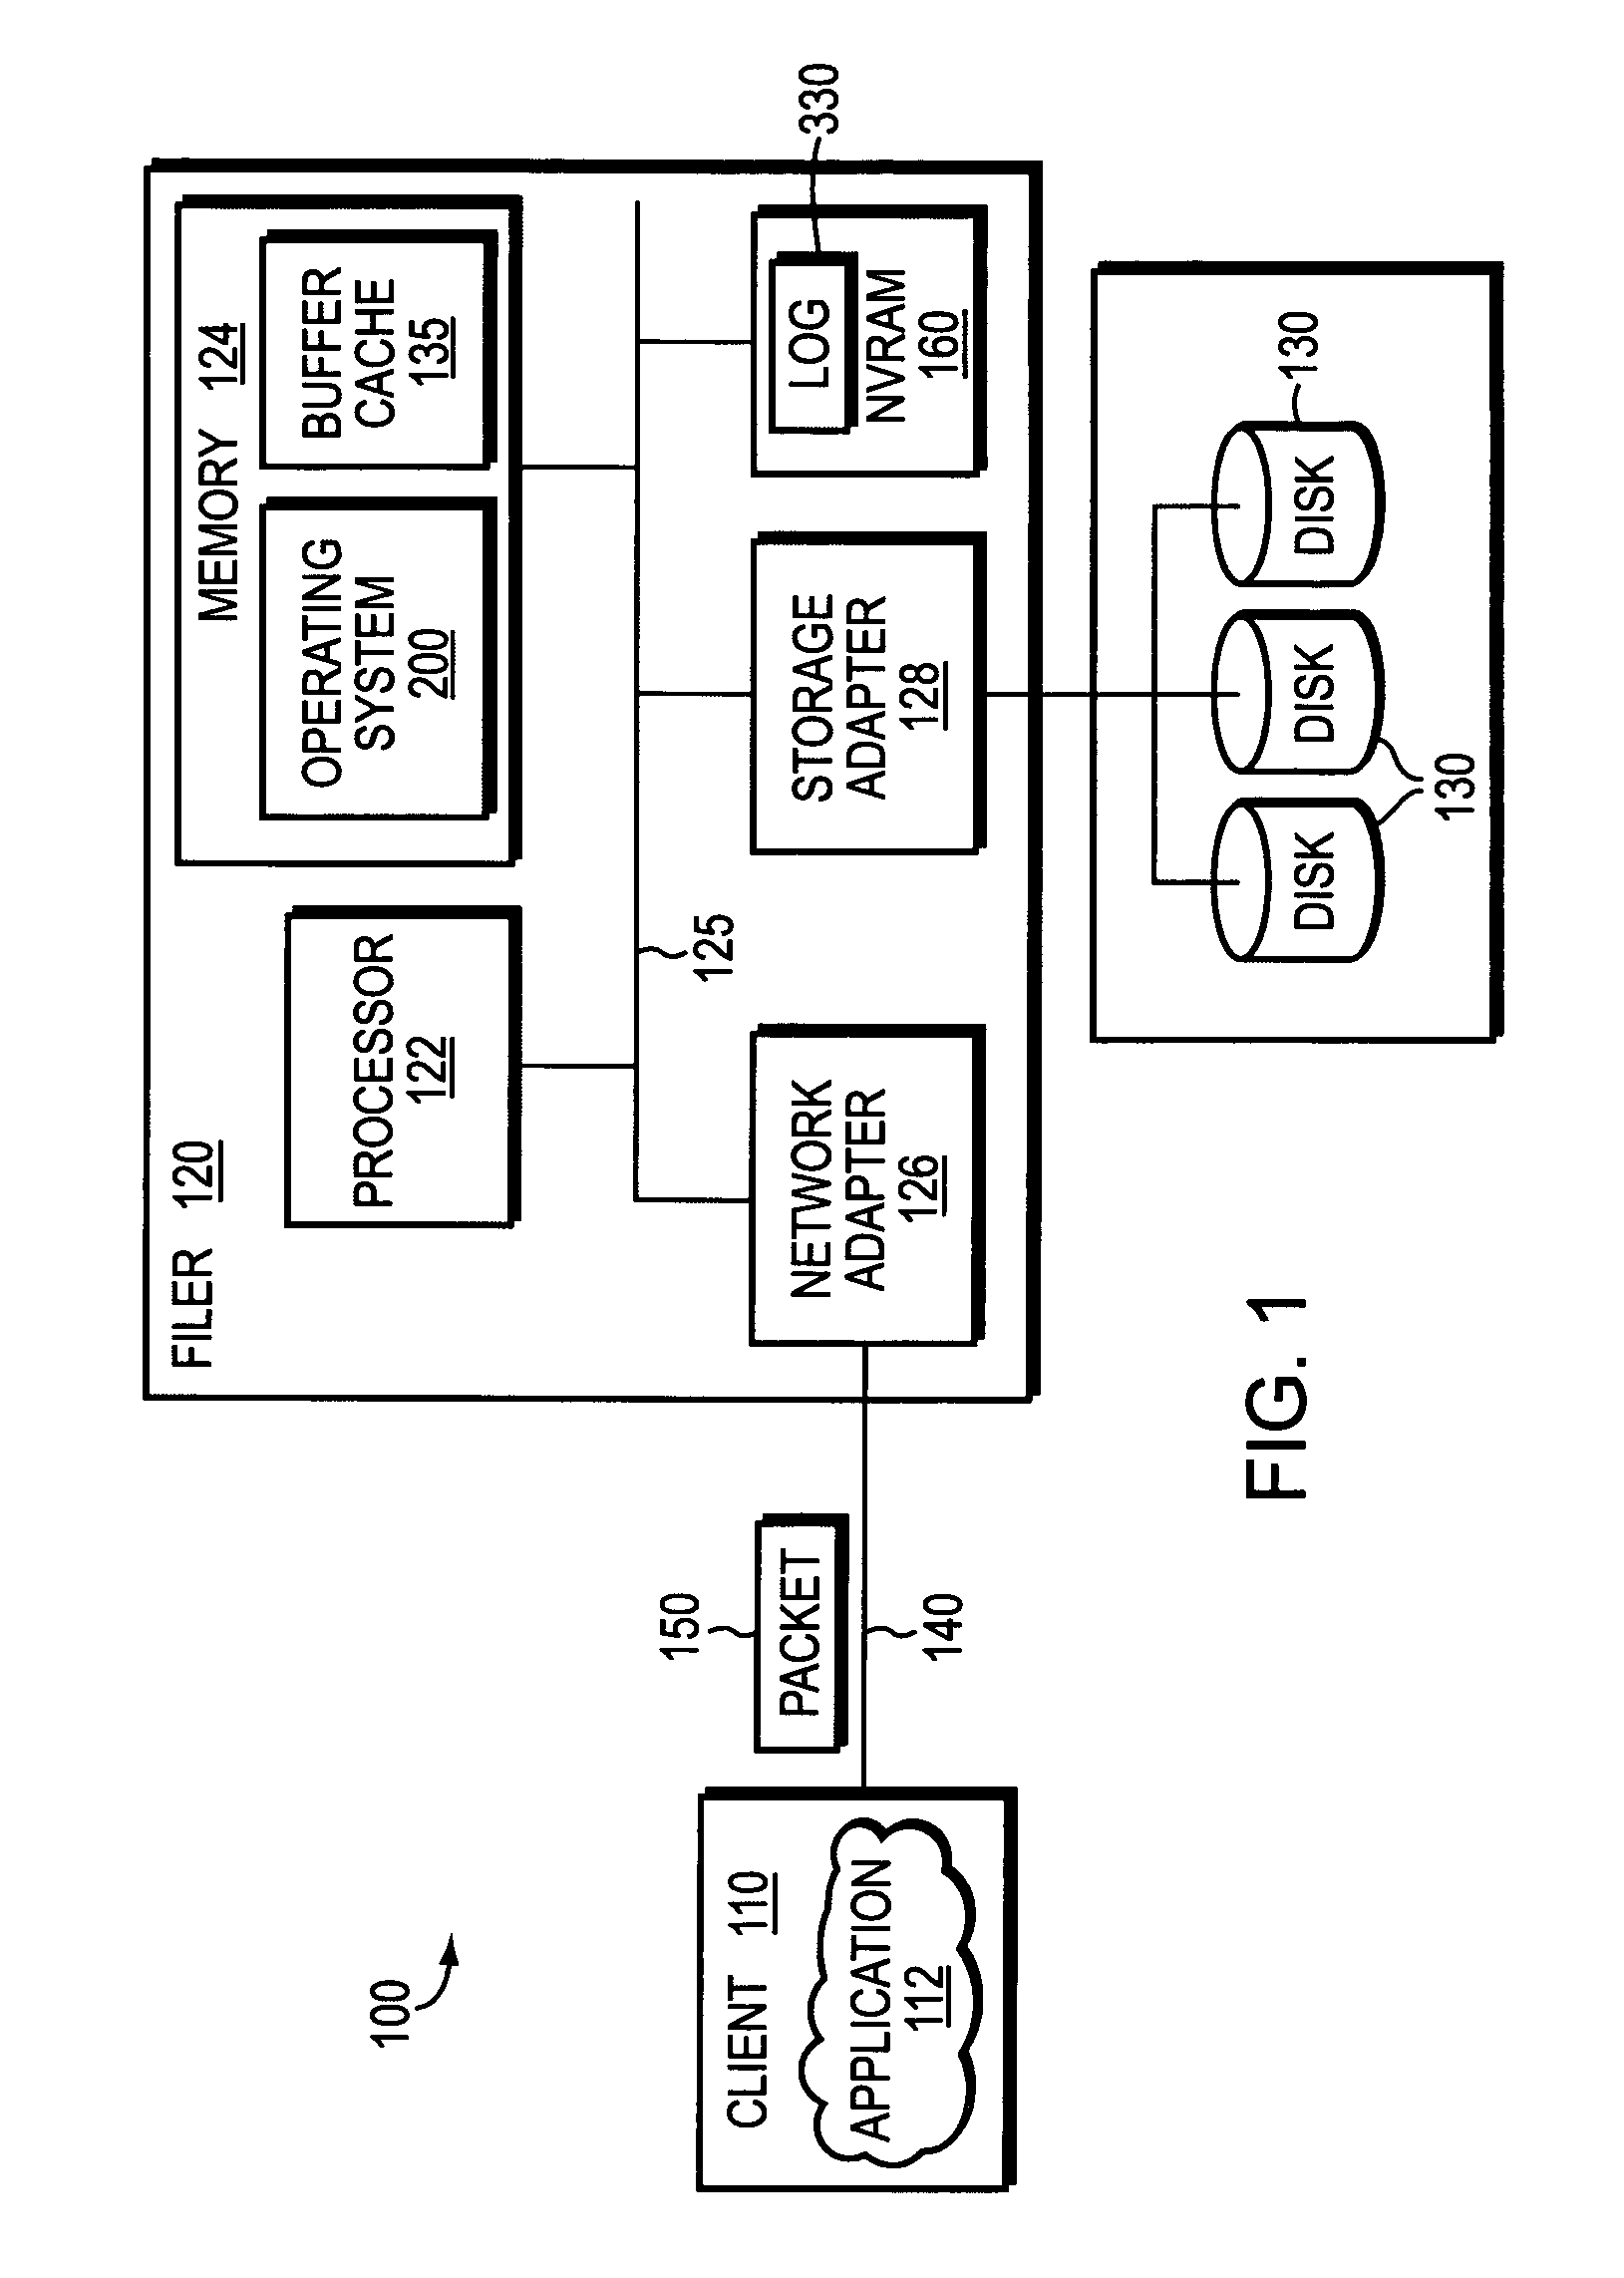 System and method for parallelized replay of an NVRAM log in a storage appliance